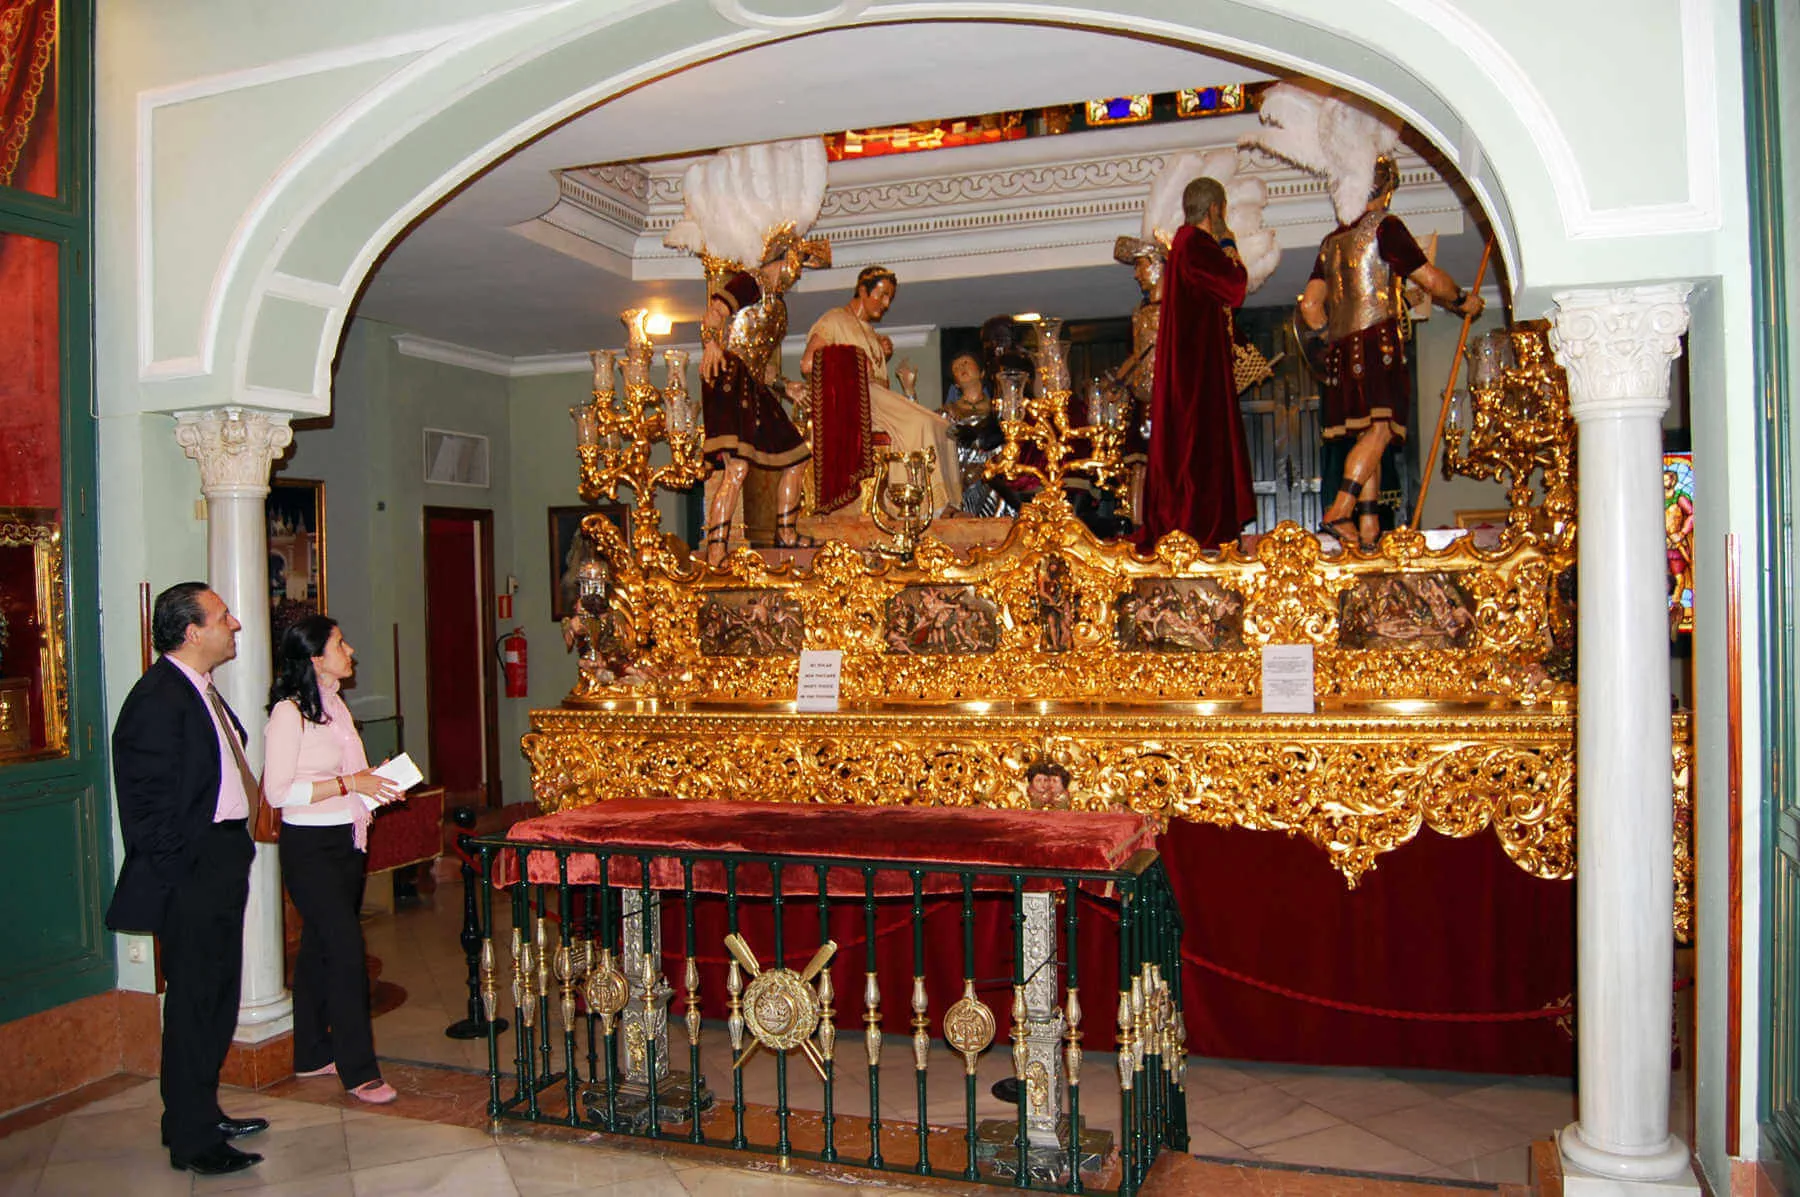 Every Good Friday, this three-ton float, depicting the Sentencing of Christ, is carried through the streets of Sevilla by teams of 48 men. For the rest of the year, it resides here at the Basílica de la Macarena